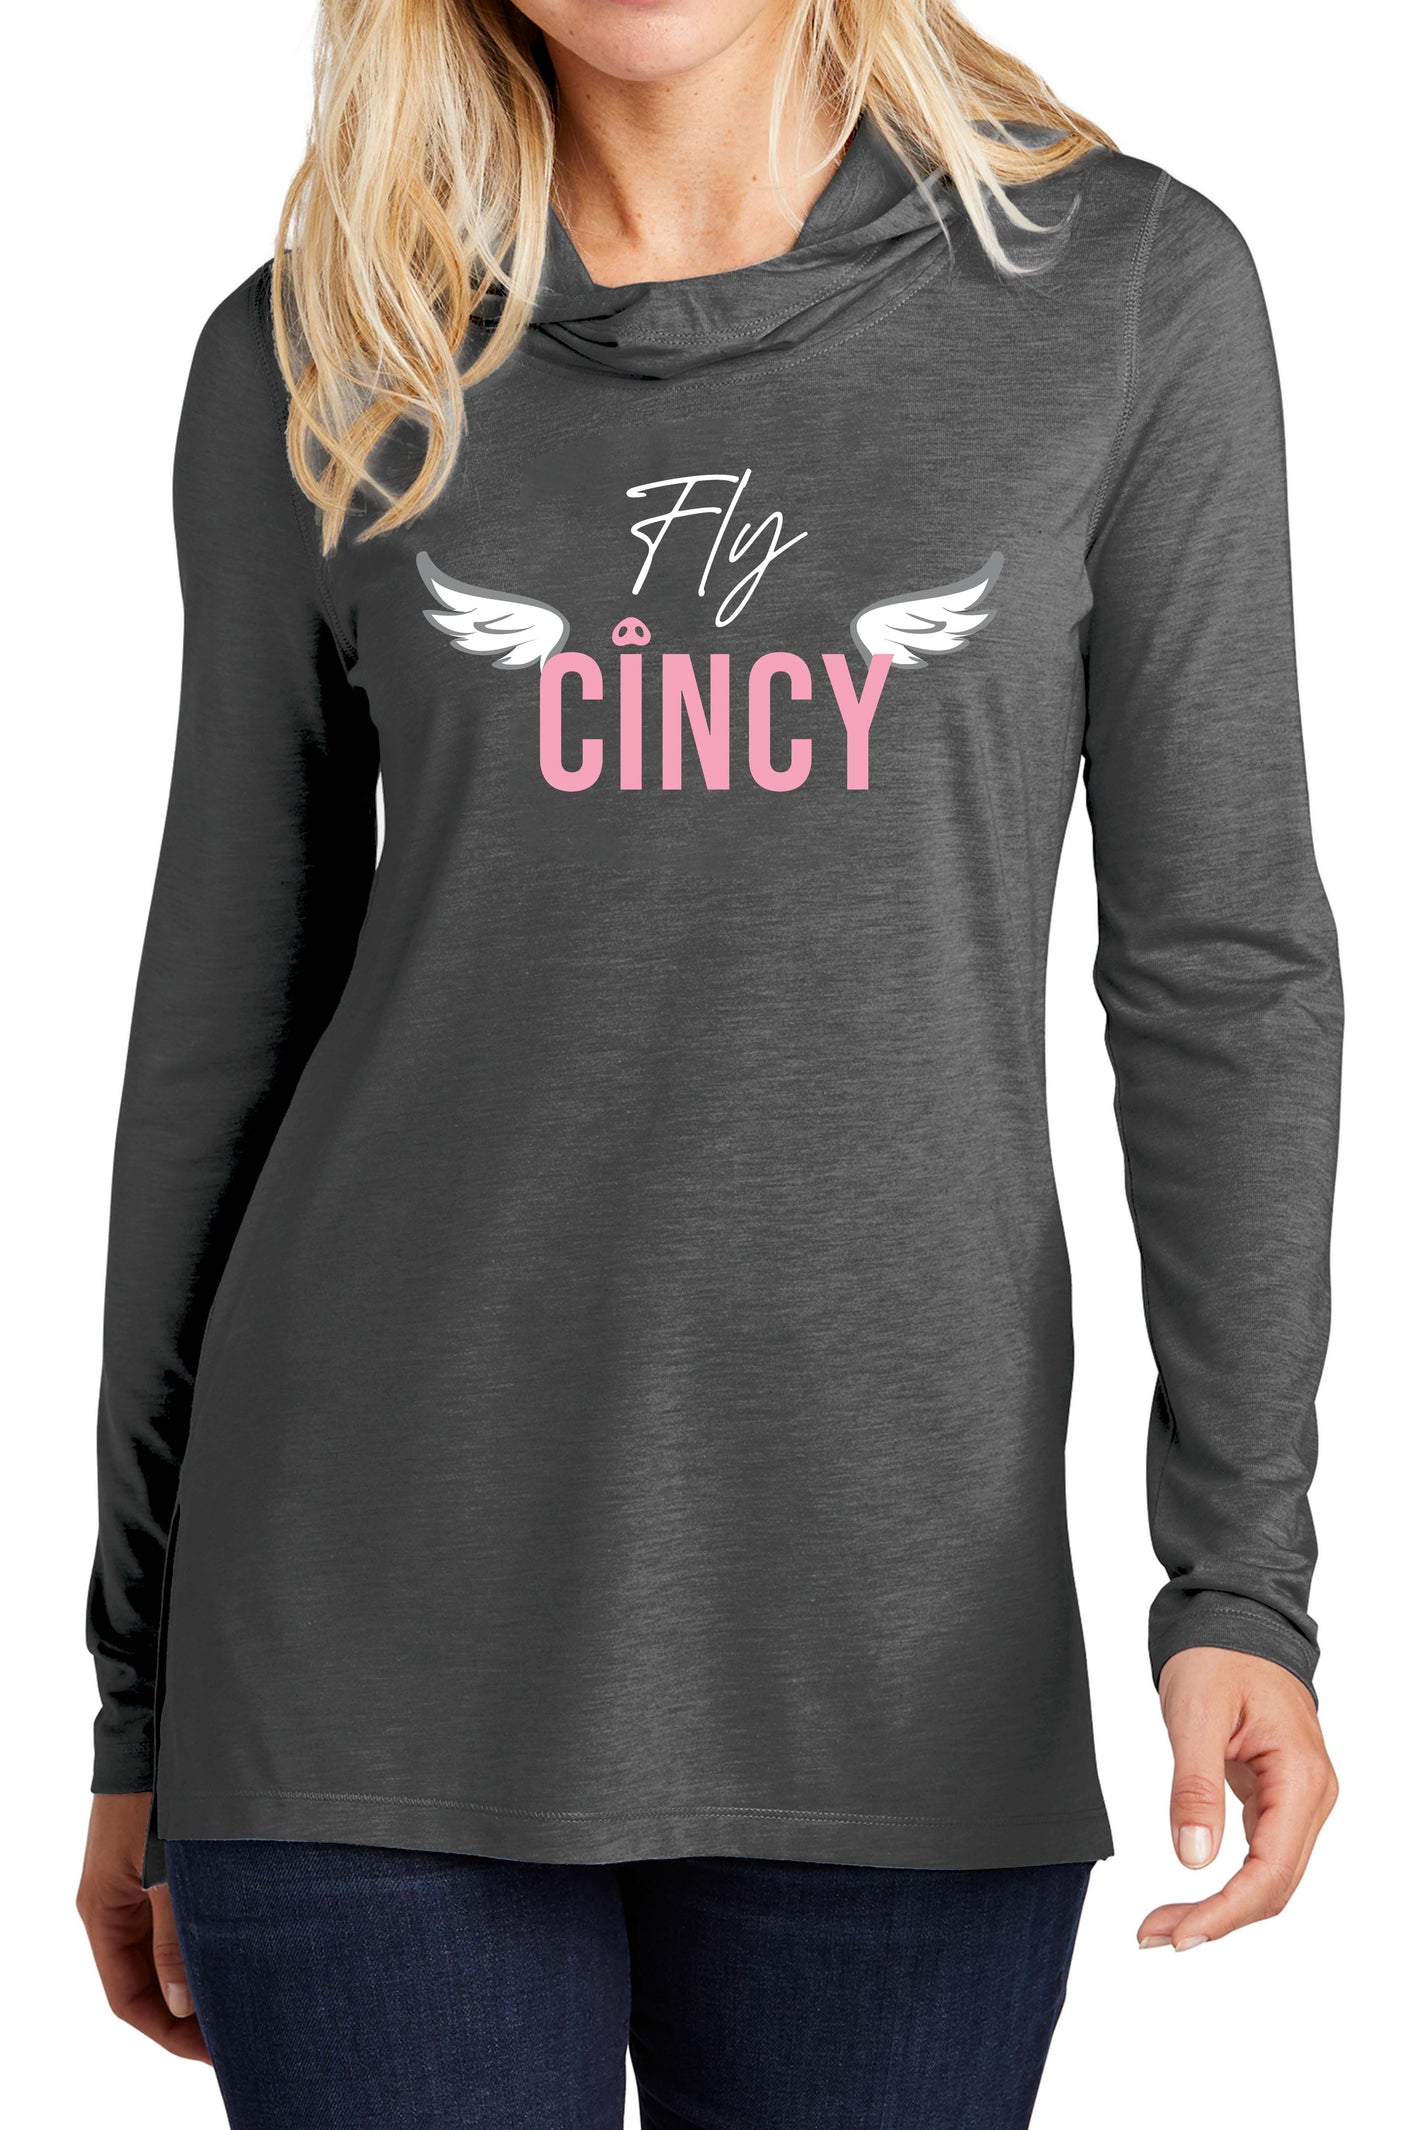 7408 - "When Pigs Fly" Fly Cincy Unisex Lightweight Hoodie - Heather Charcoal